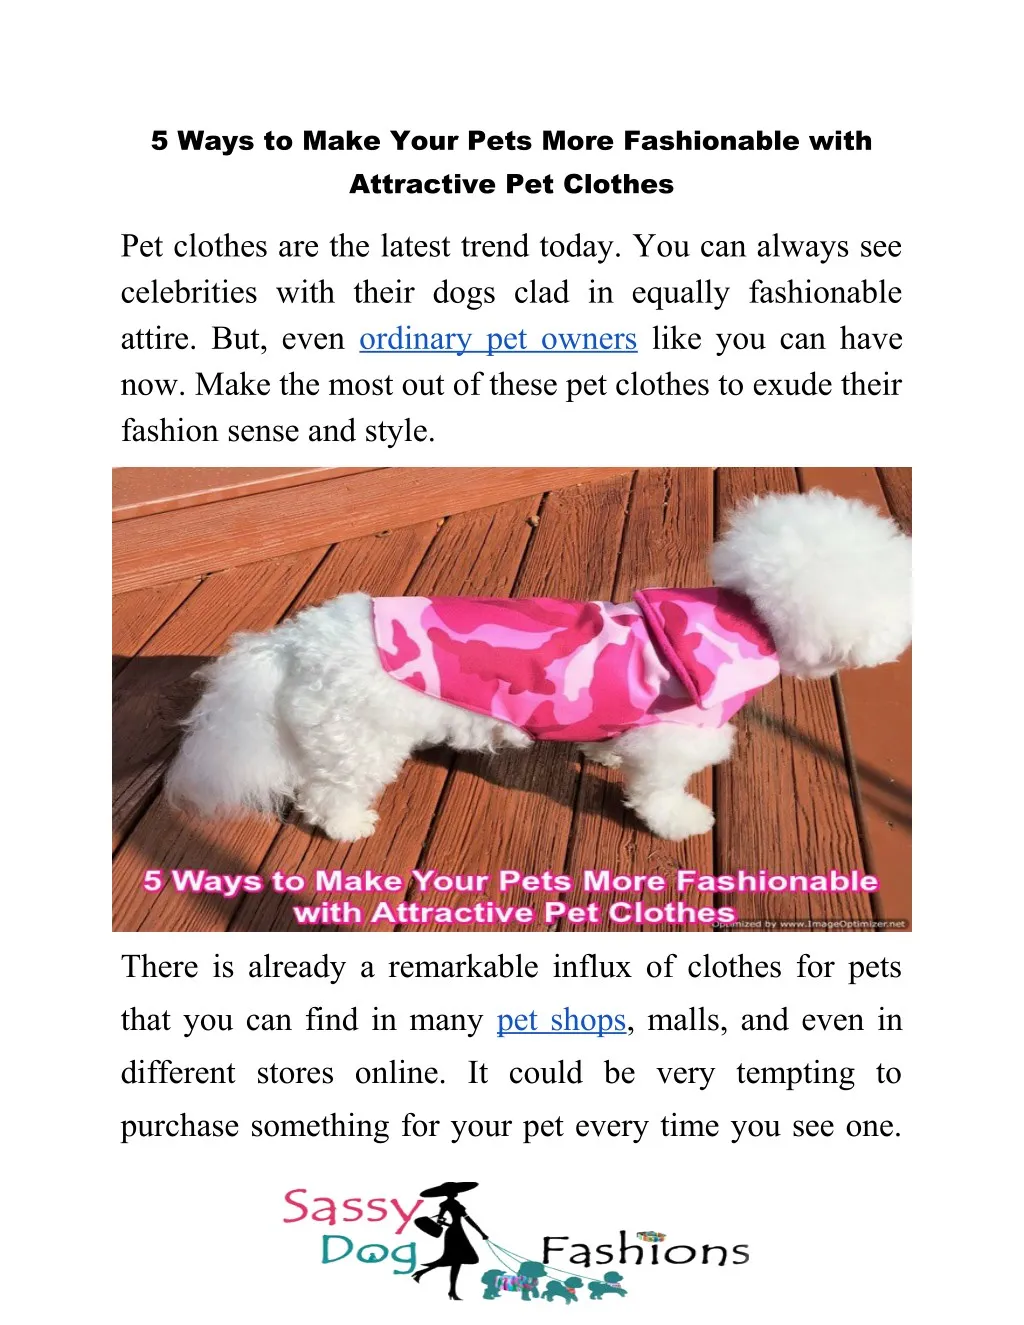 5 ways to make your pets more fashionable with